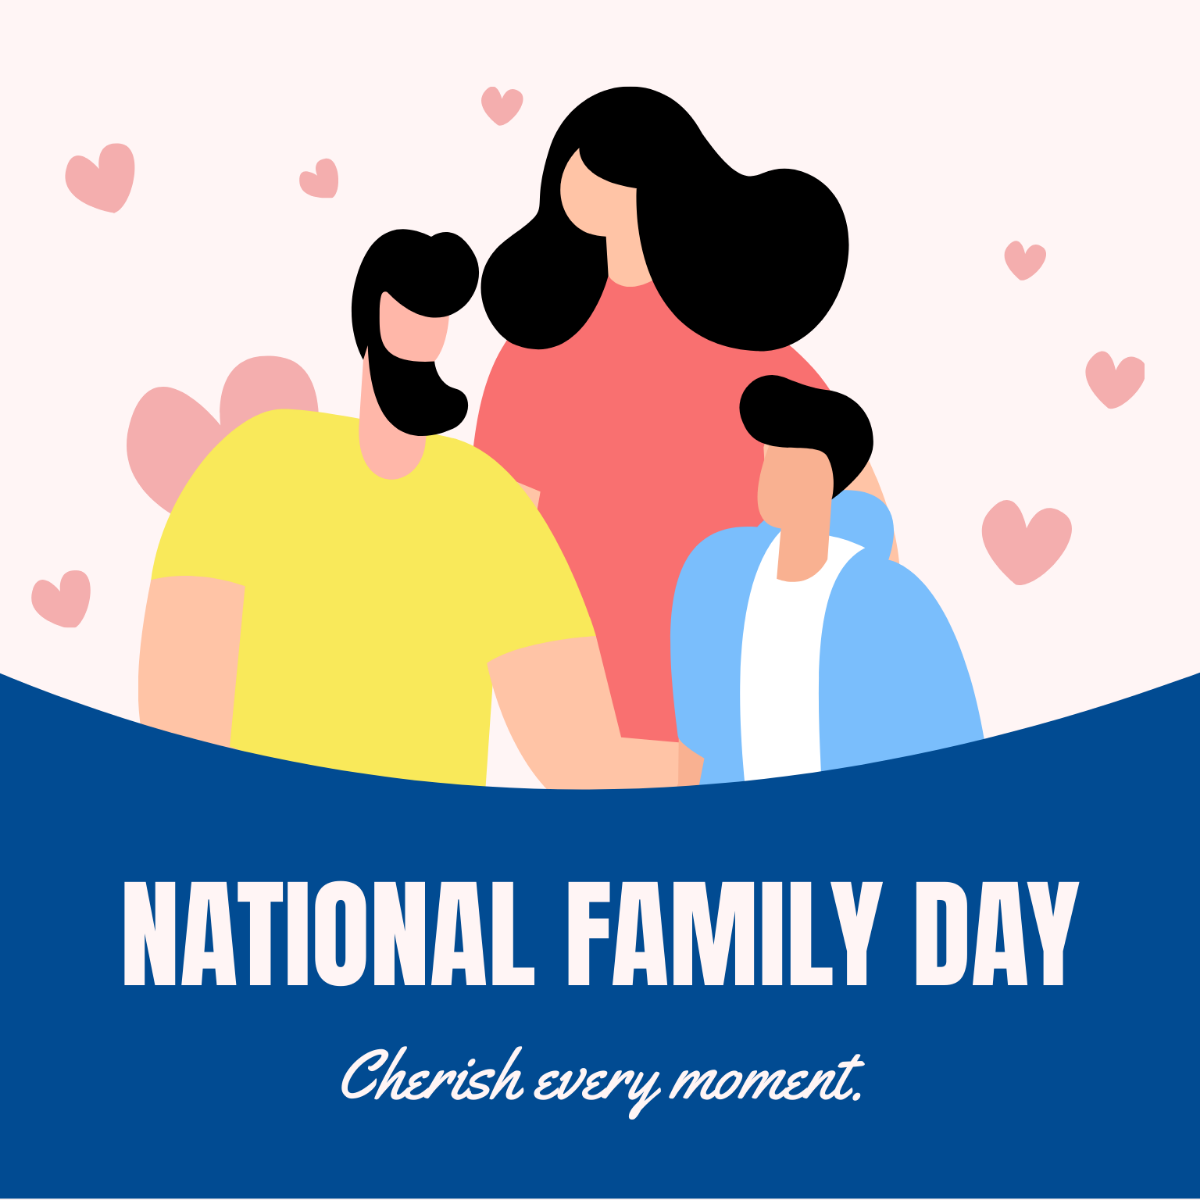 National Family Day Poster Vector